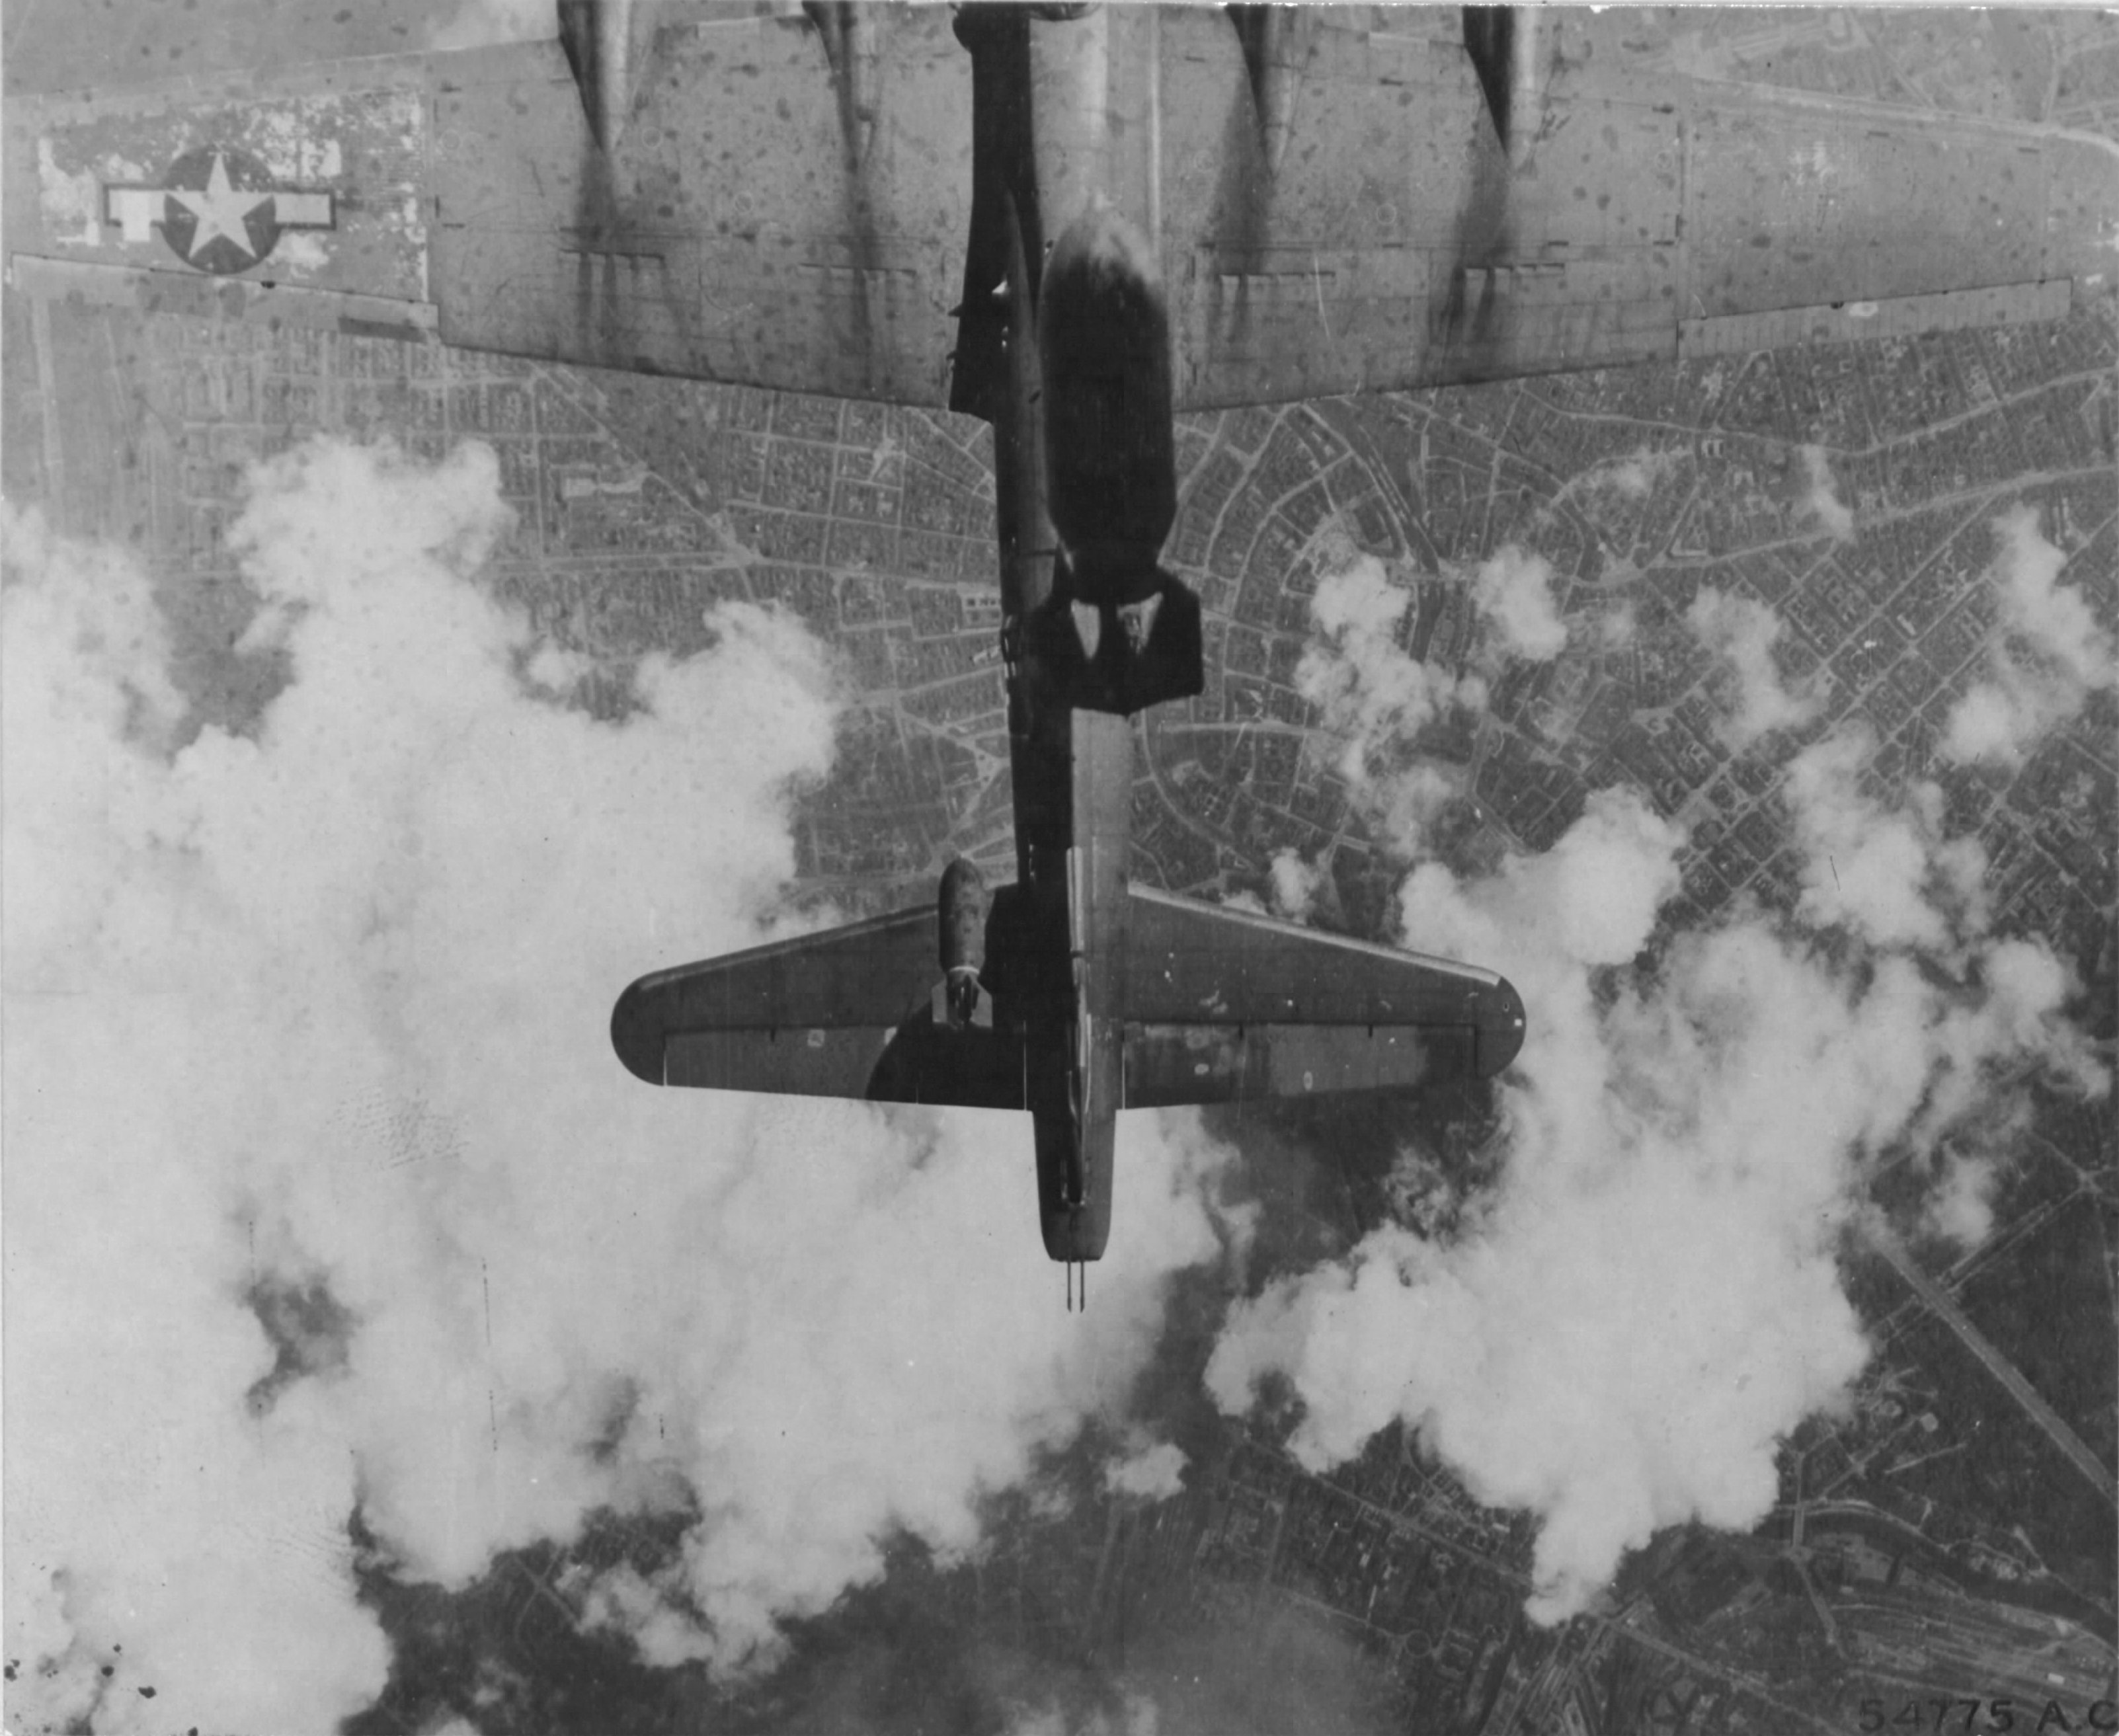 B-17G Fortress 'Miss Donna Mae II' drifted under another bomber on a bomb run over Berlin, 19 May 1944. A 1,000 lb bomb from above tore off the left stabilizer and sent the plane into an uncontrollable spin. All 11 were killed. Photo 1 of 4